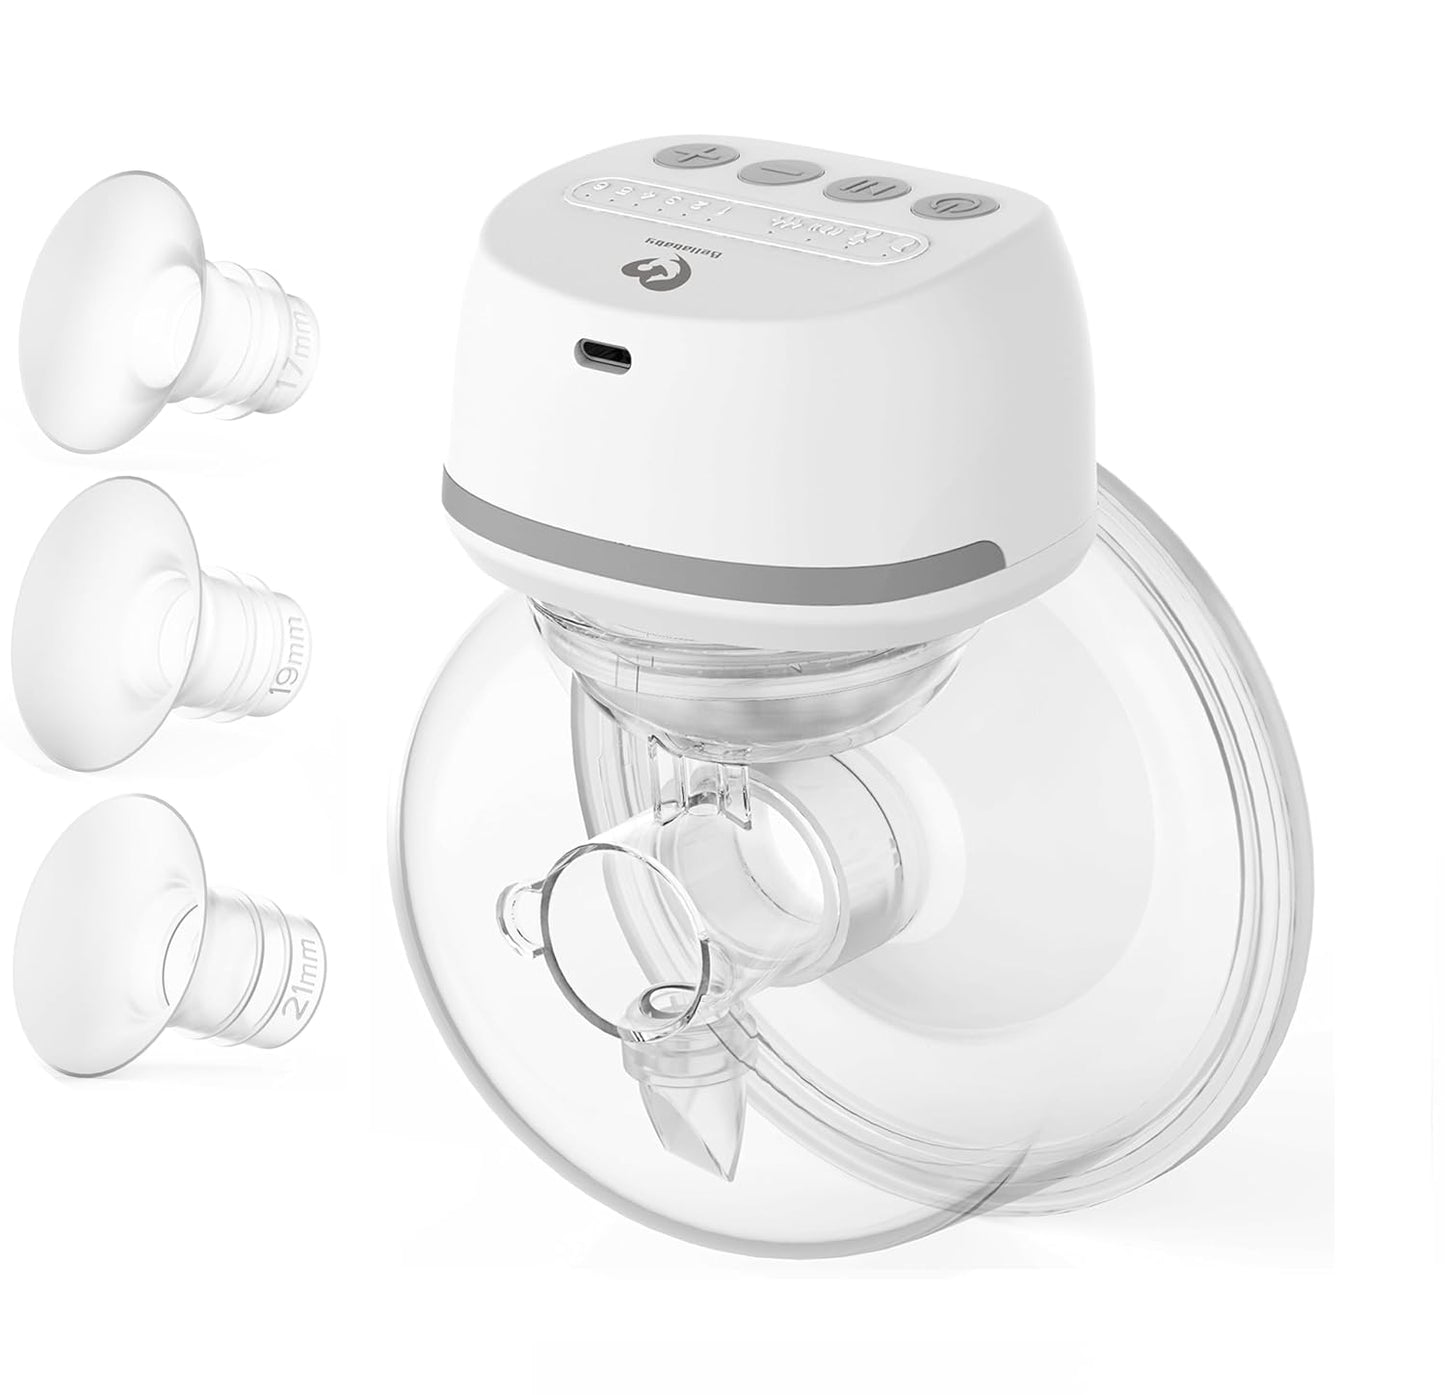 Bellababy Electric Portable Breast Pump Double Hands-Free with Touchscreen LCD Display, Rechargeable Hands-Free 4 Modes and 9 Levels, White